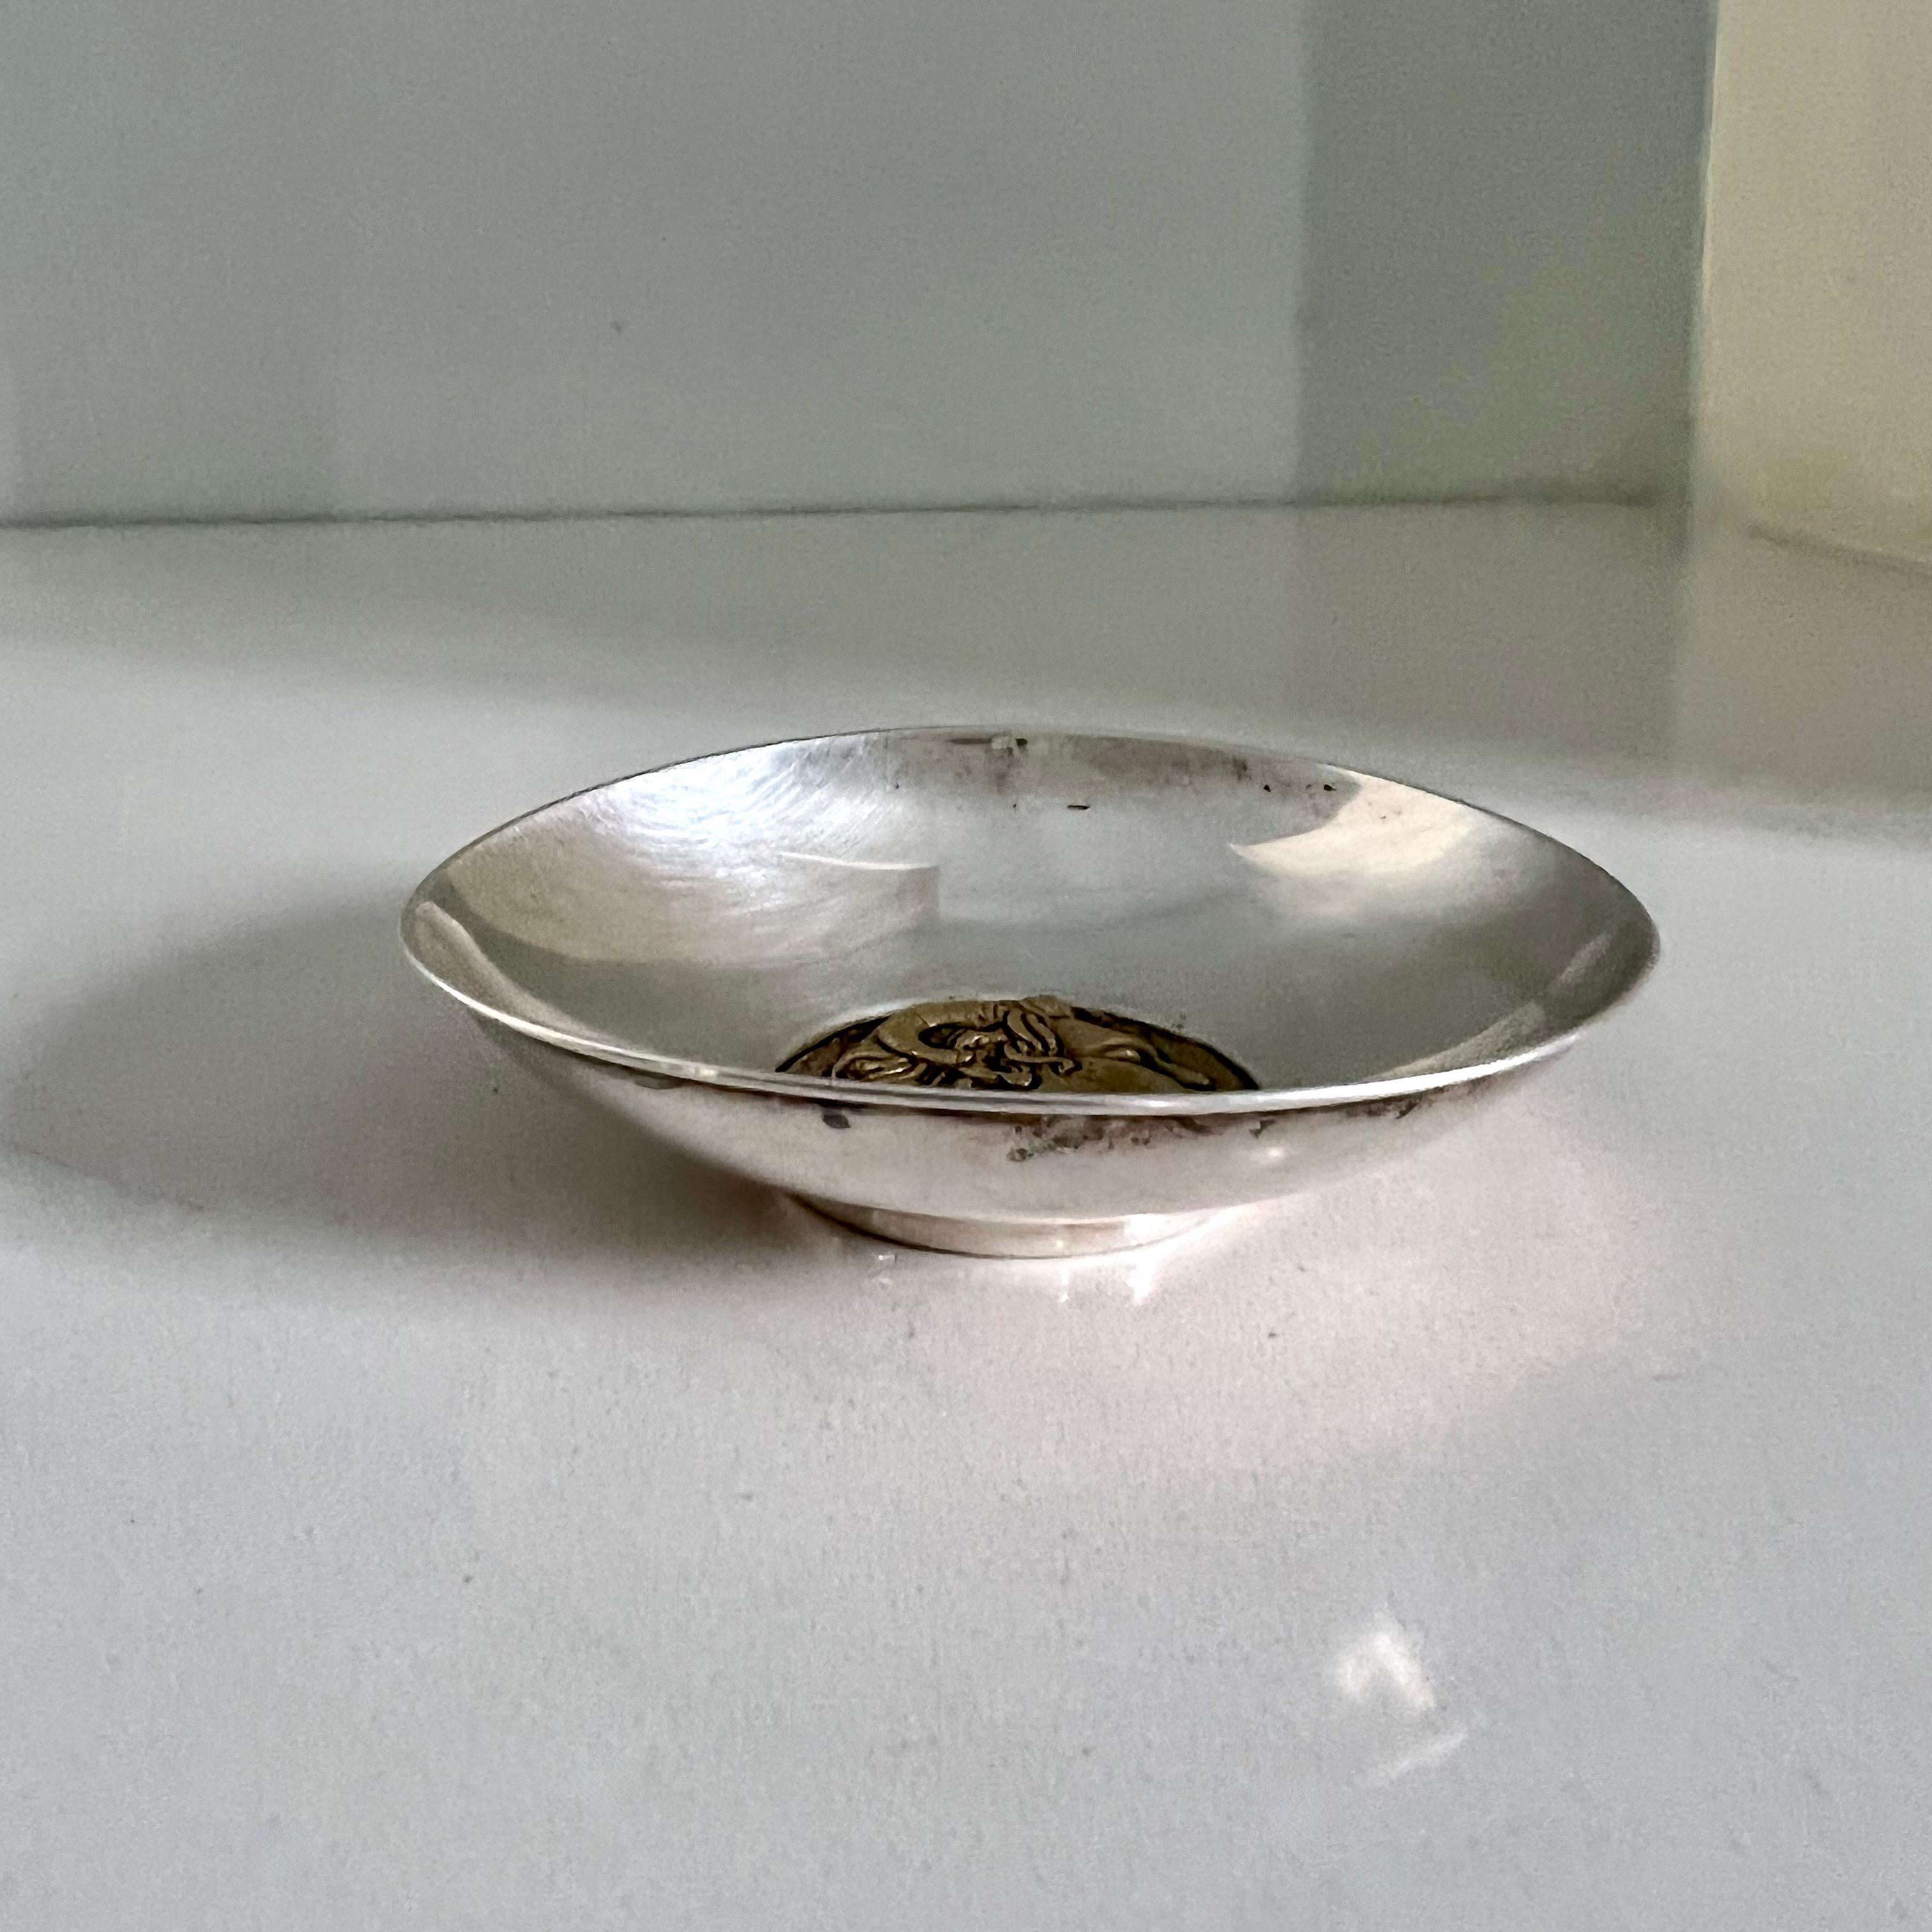 Polished sterling silver and brass trinket, coin or ring dish. Brass Satyr profile in brass at the base of the bowl is very detailed and impressive

Satyrs are woodland gods seen as symbols of fertility.